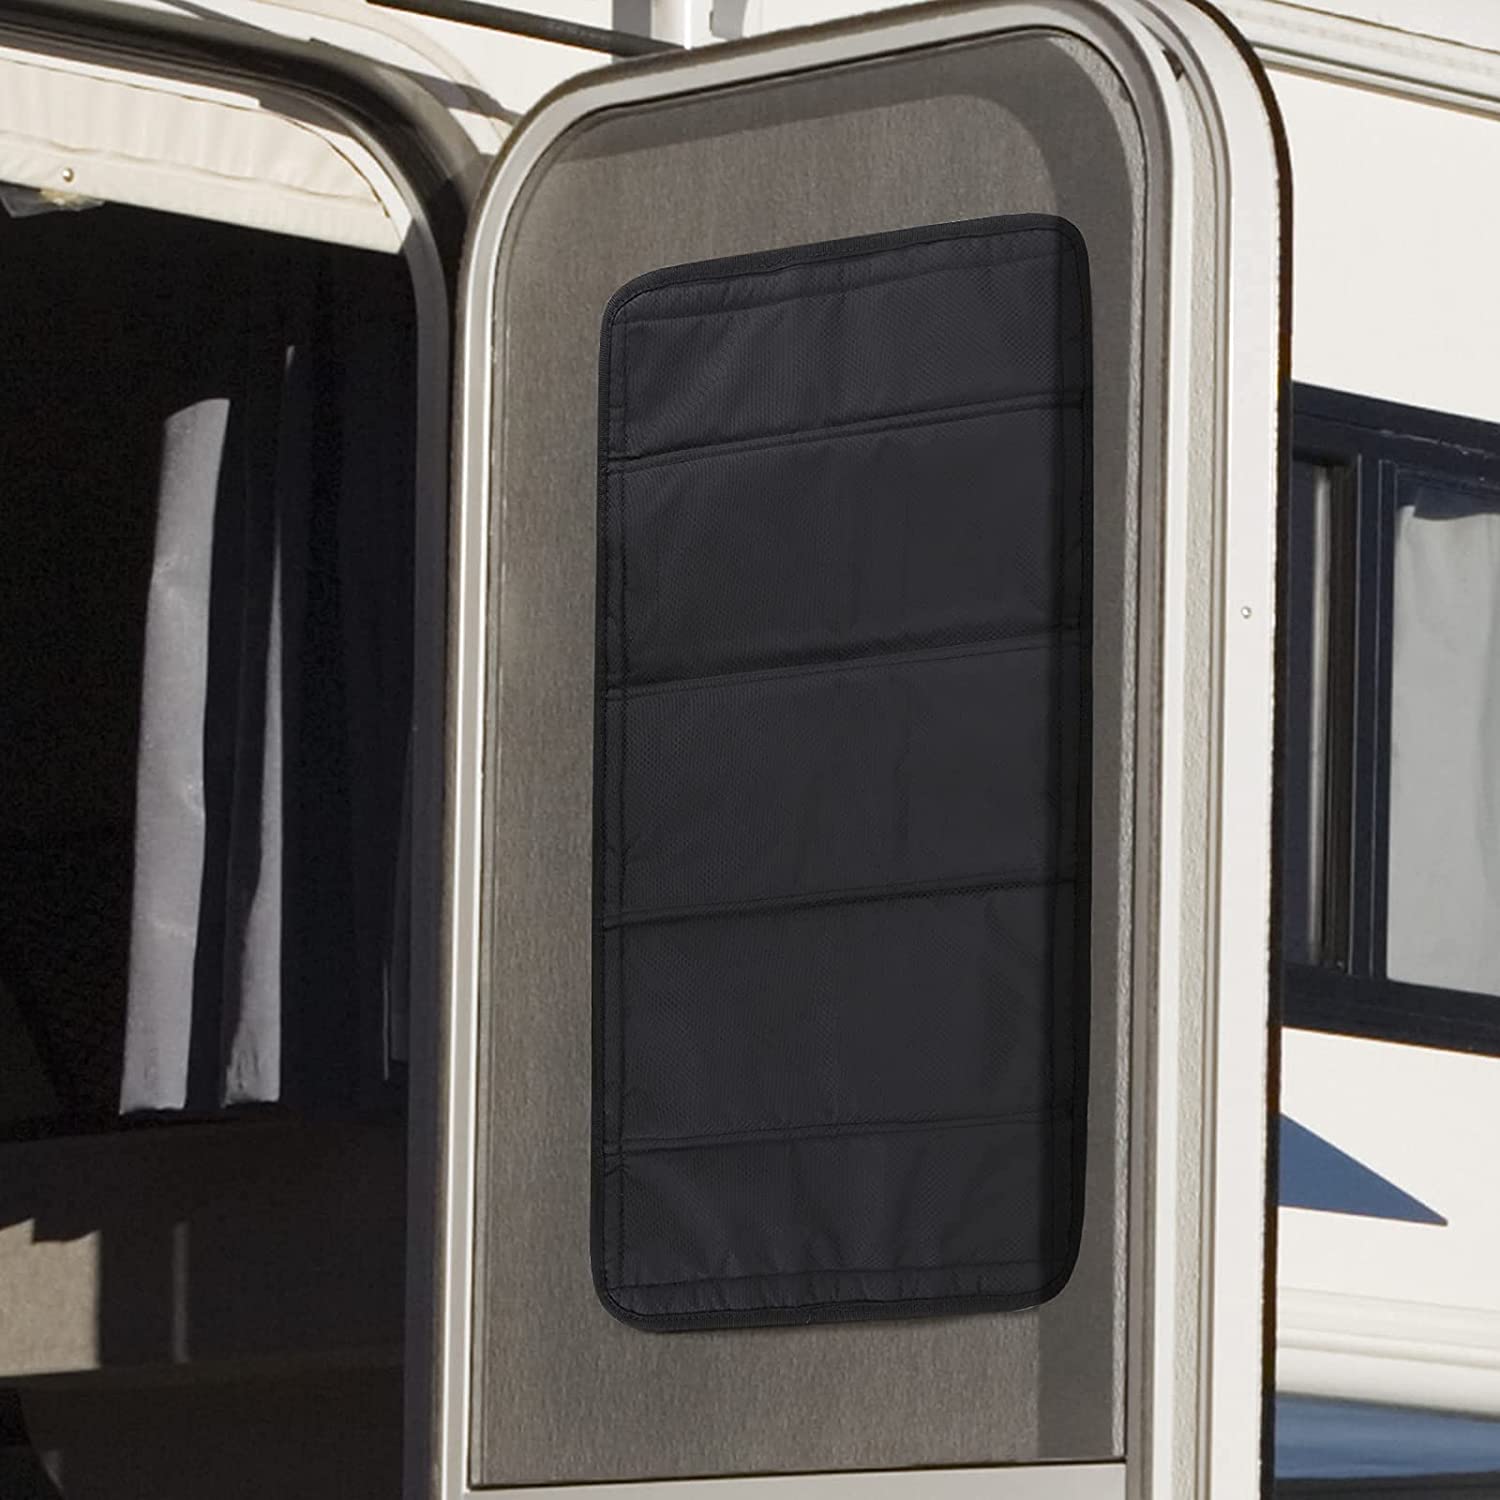 RV Door Window Shade Cover, Sun Blackout Fabric for Camper Privacy Entrance  (16 x 25 inch)